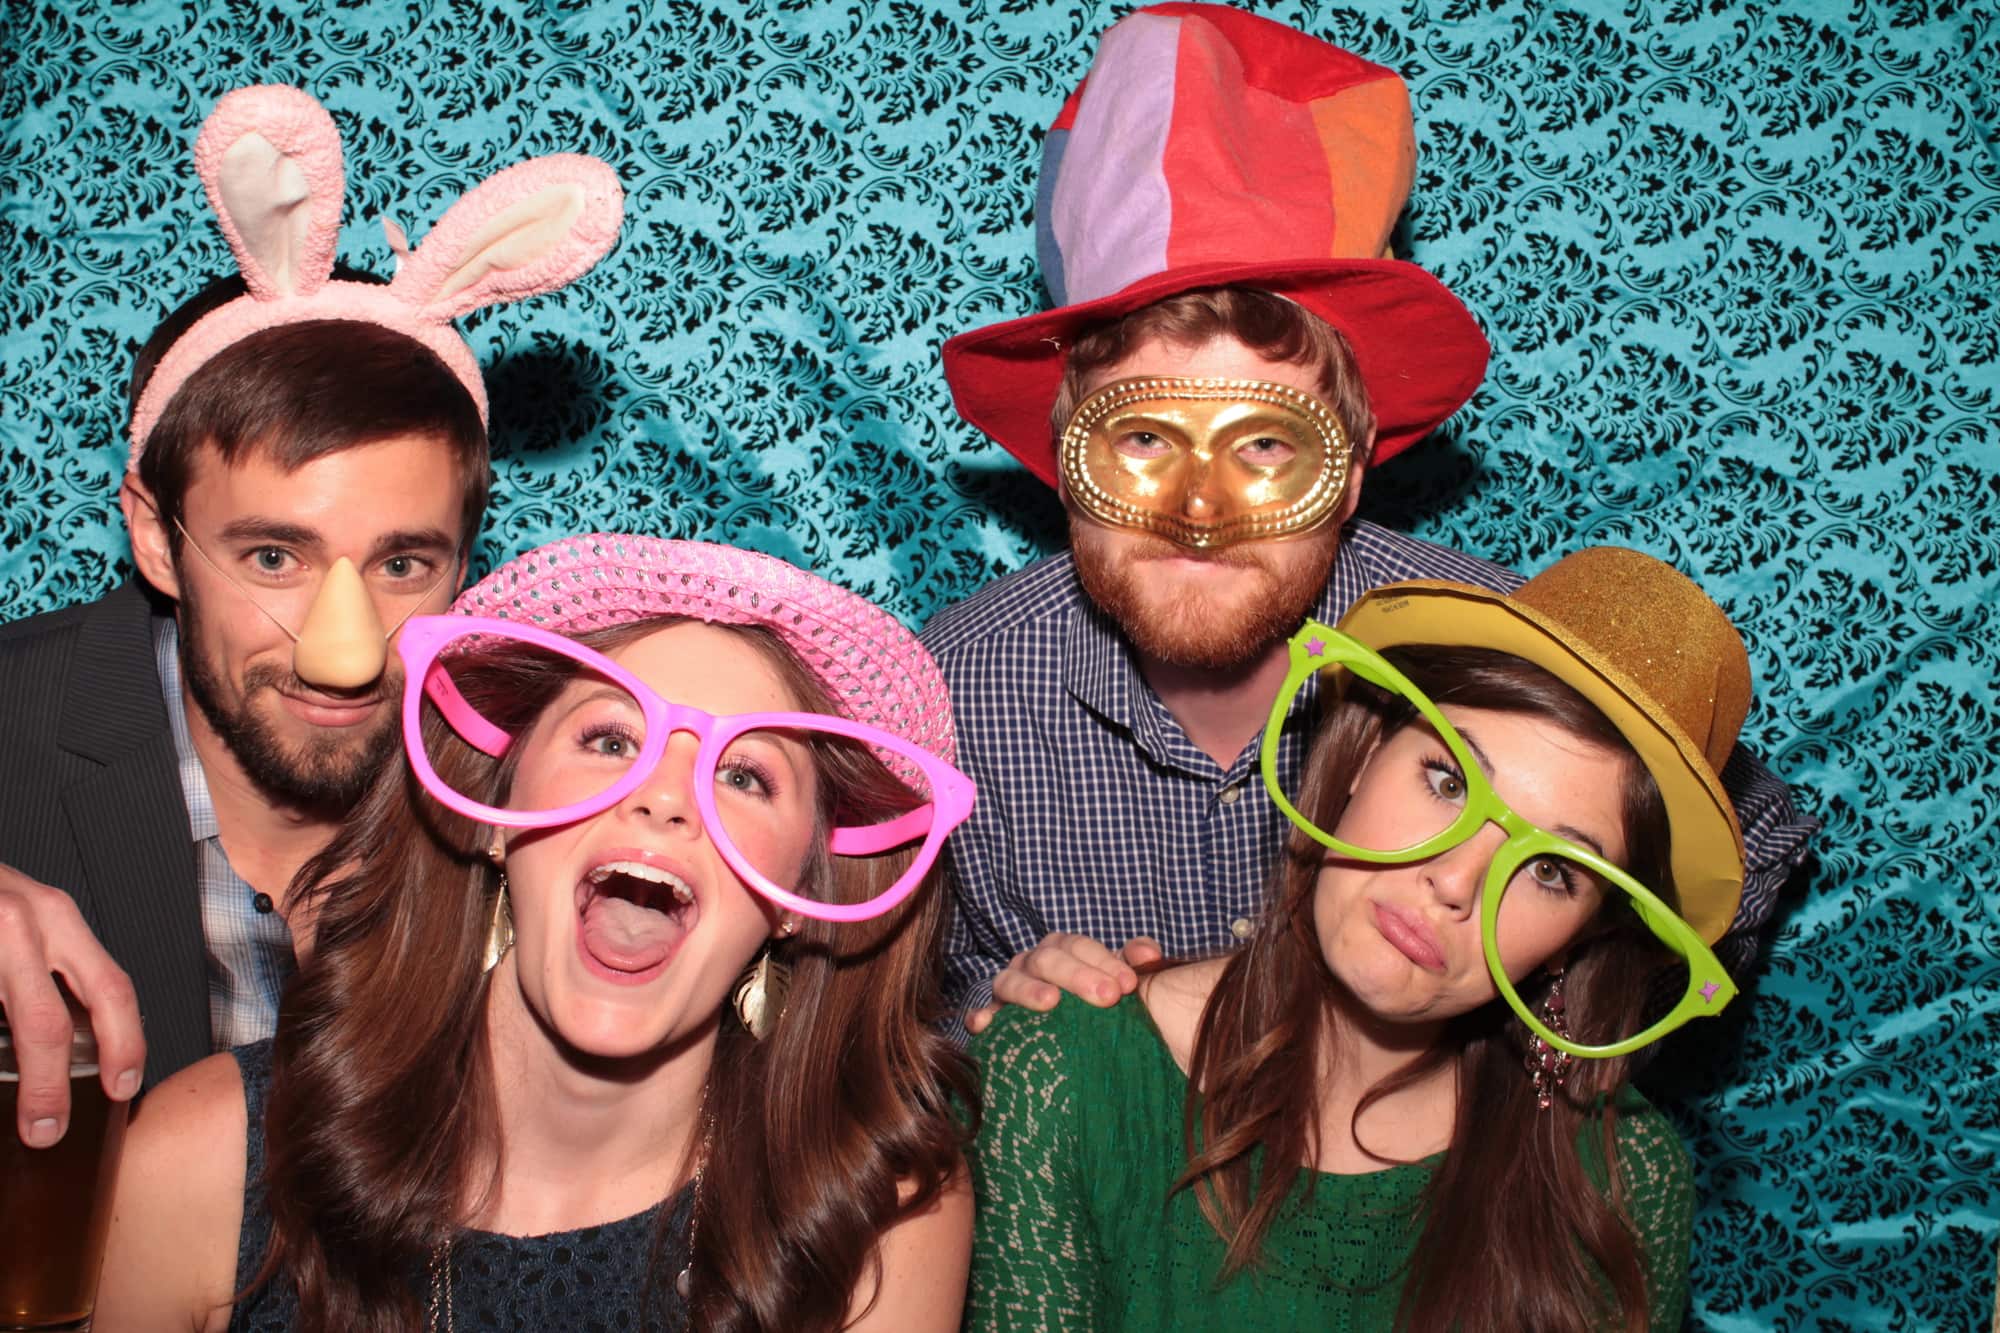 Photobooth-Rental-Company-Party-Anniversity-No. 1-Austin-Memories-Awesome-Fun